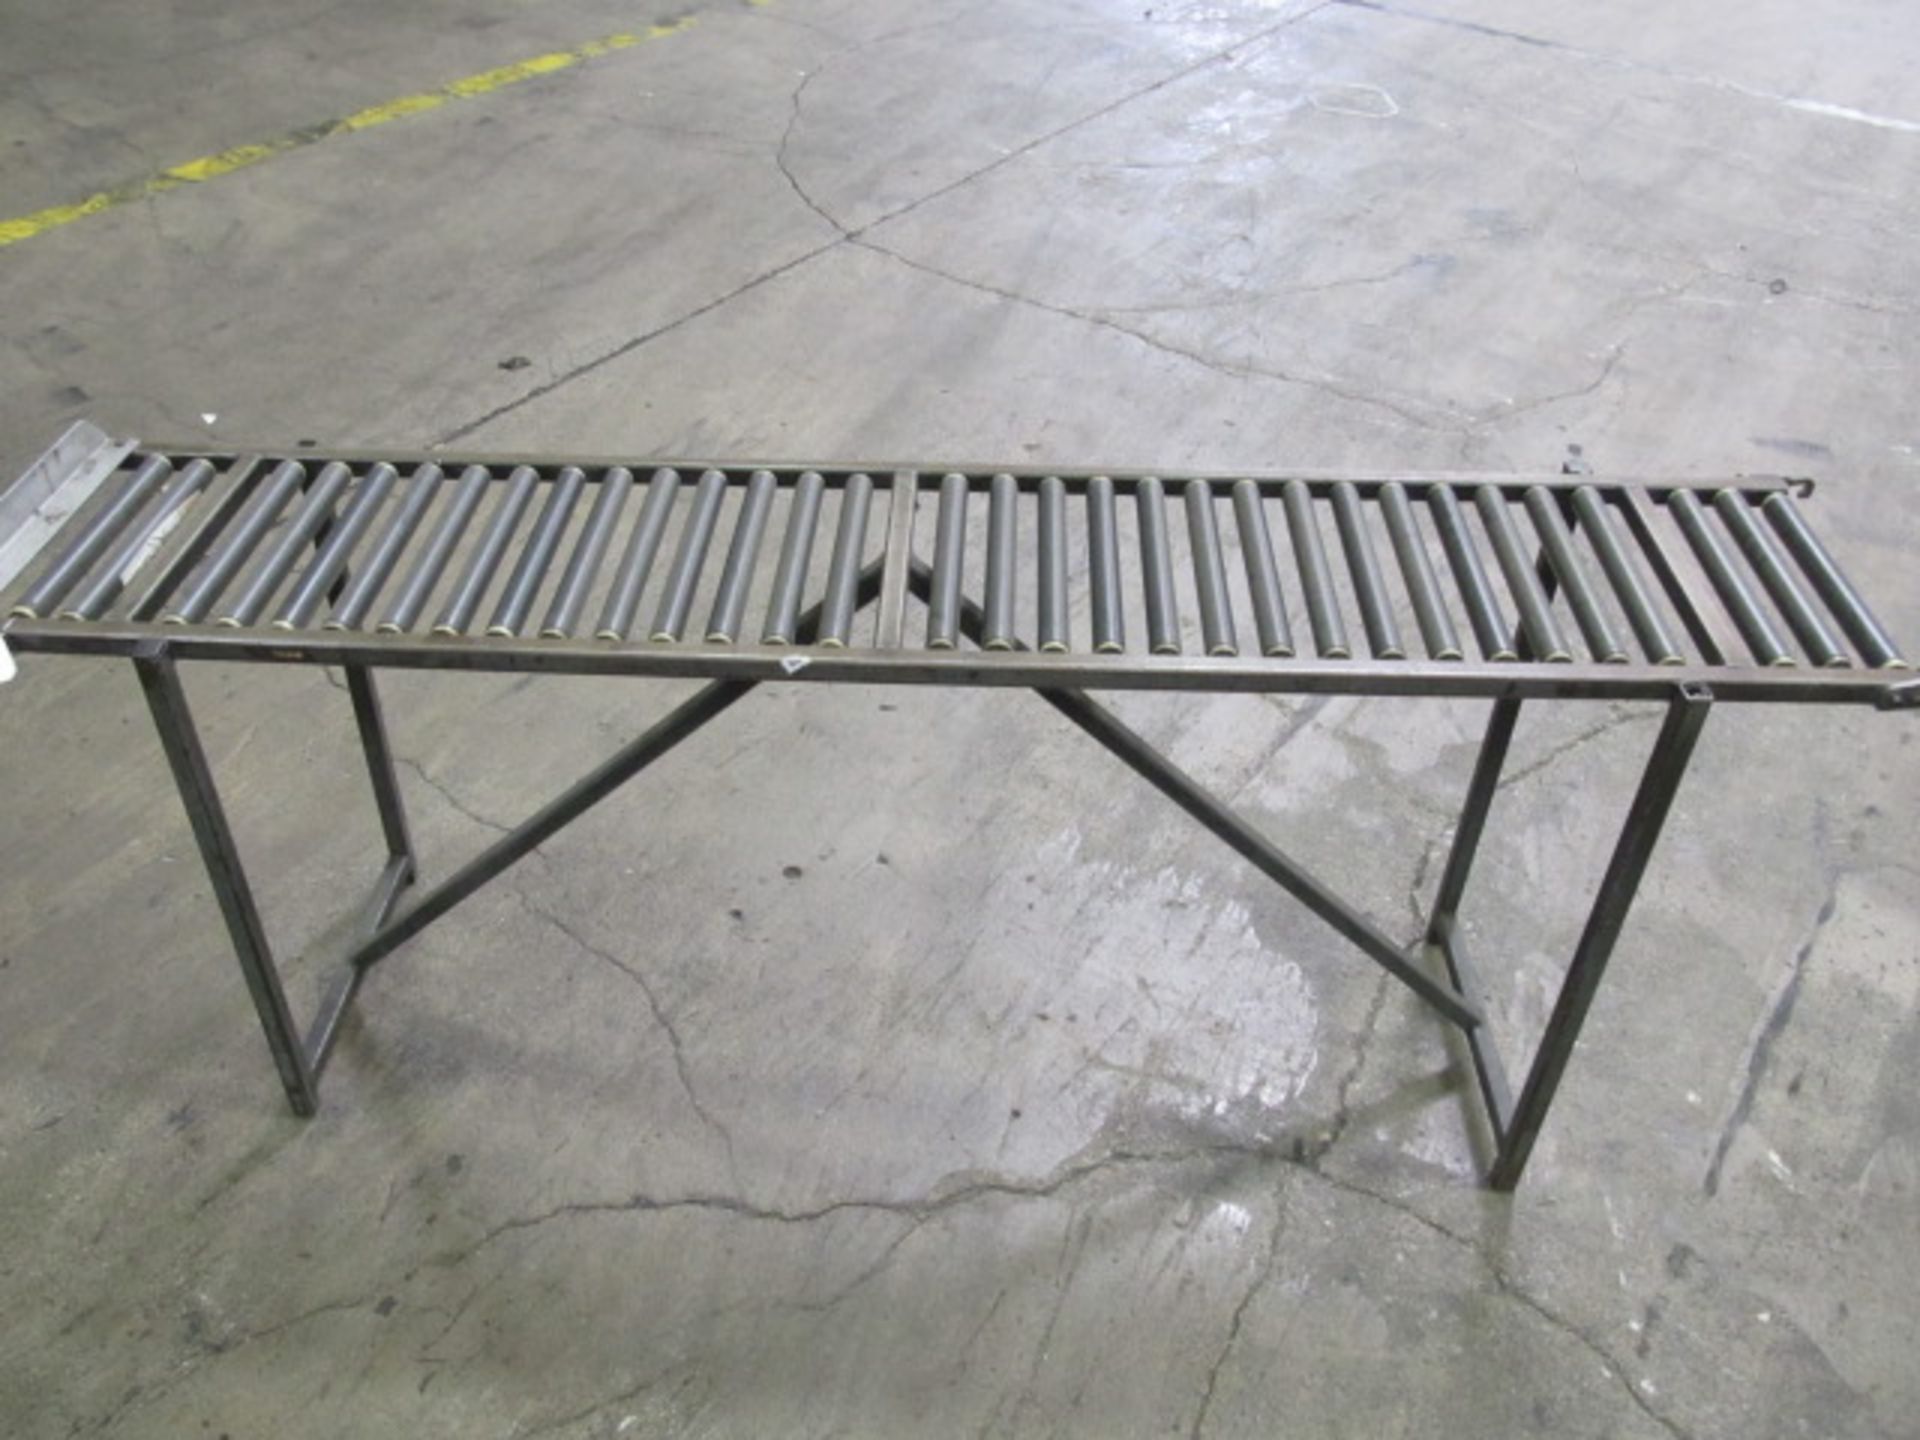 Stationary Conveyor On Stands, Measures Approx. 4Ft.L x 18in.W With Approx. 10 Degree Angle. Asset